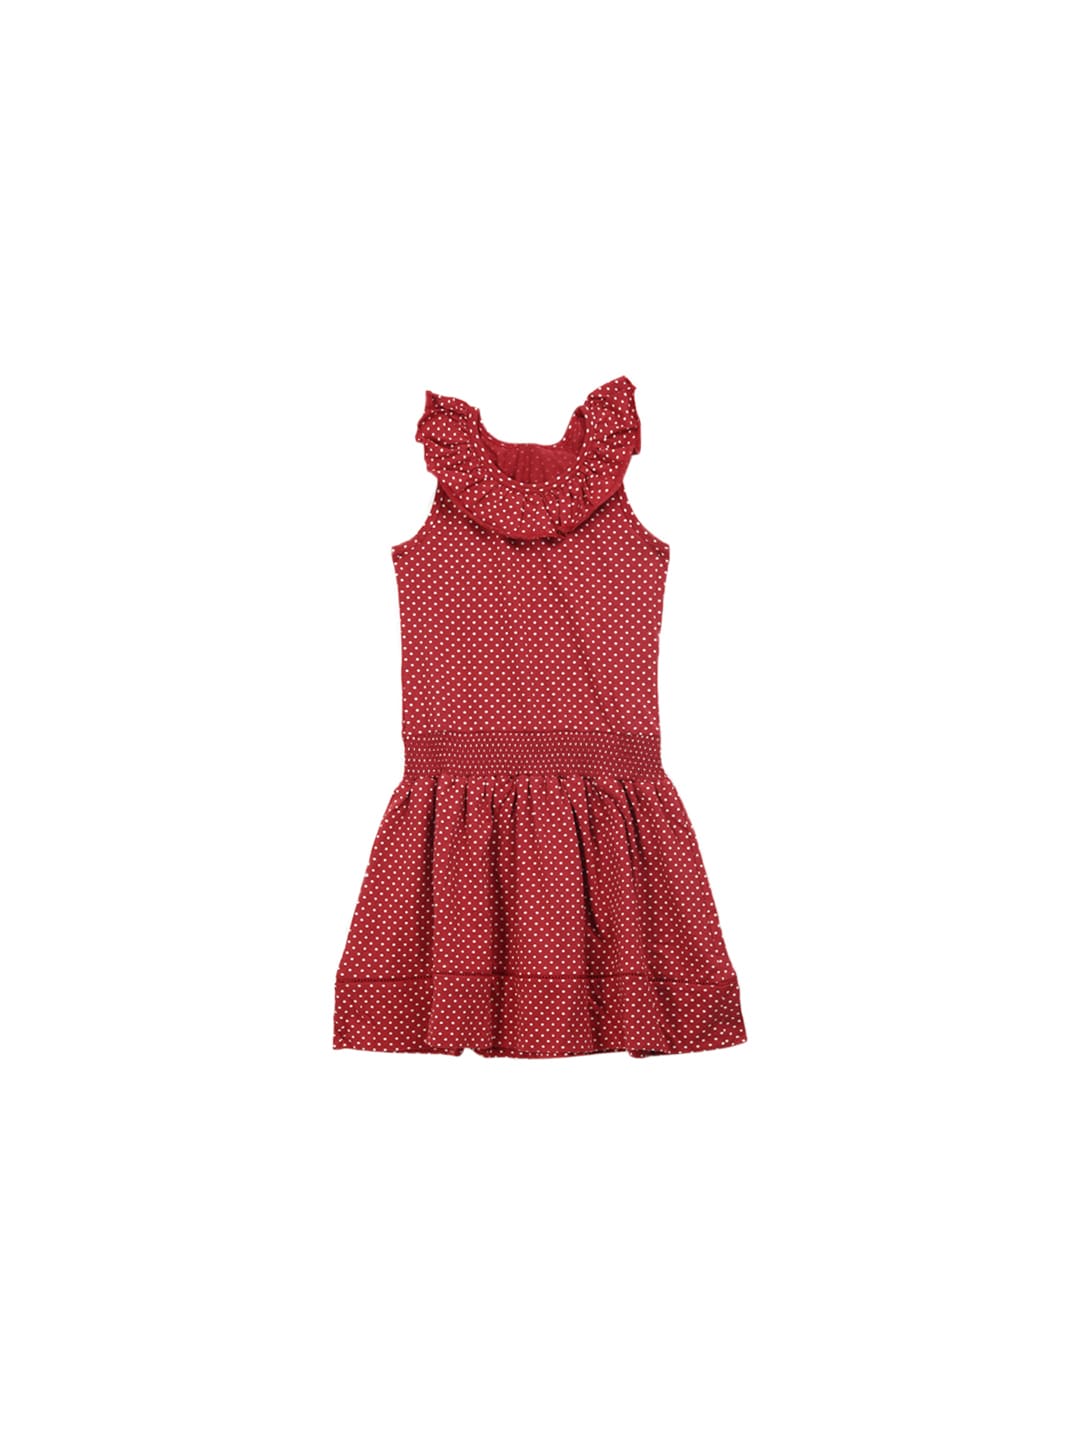 United Colors of Benetton Girls Red Printed Dress